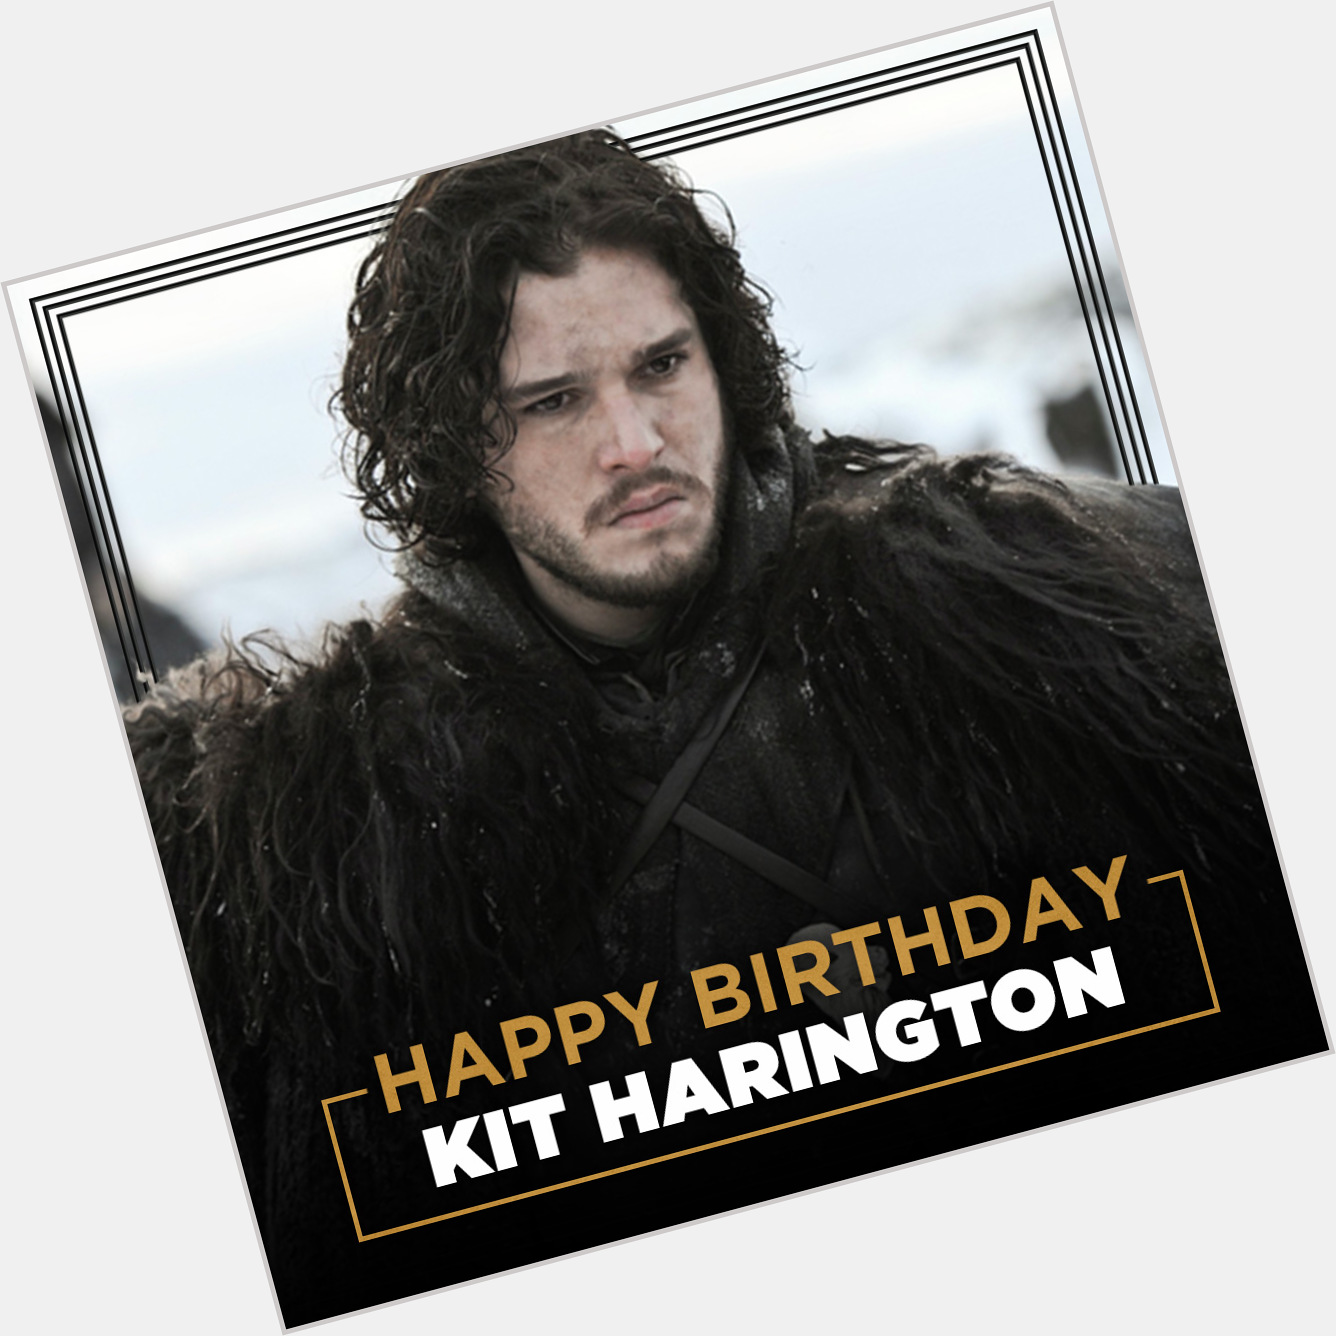 Jon Snow. King of the North and of knowing nothing REmessage to wish Kit Harington a Happy Birthday! 